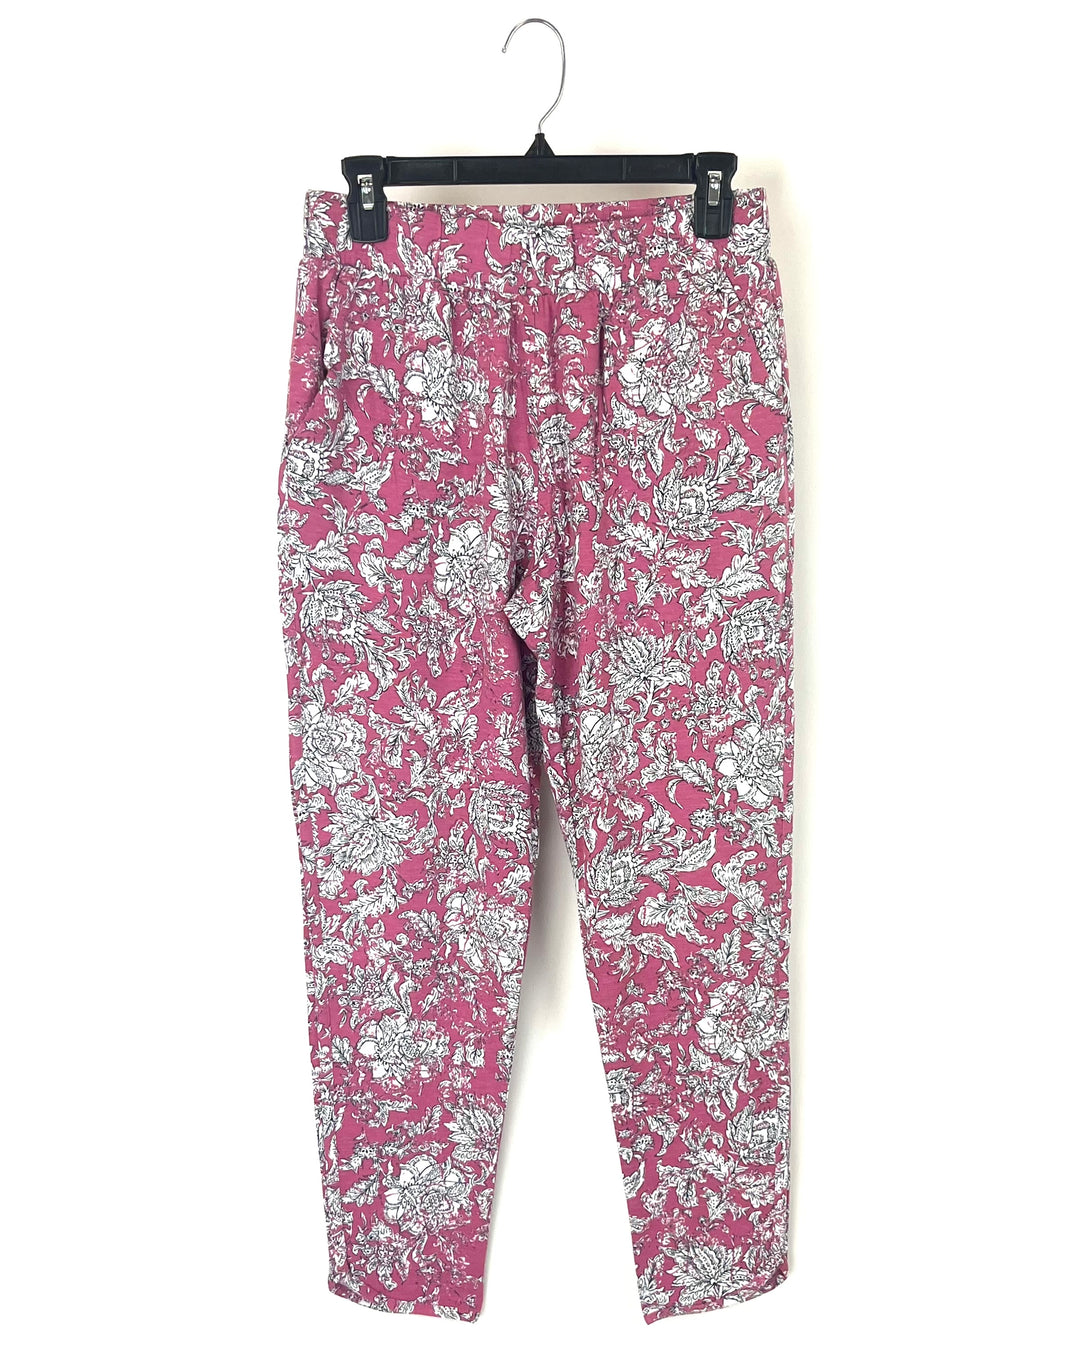 Pink and White Floral Pants - Size 4/6